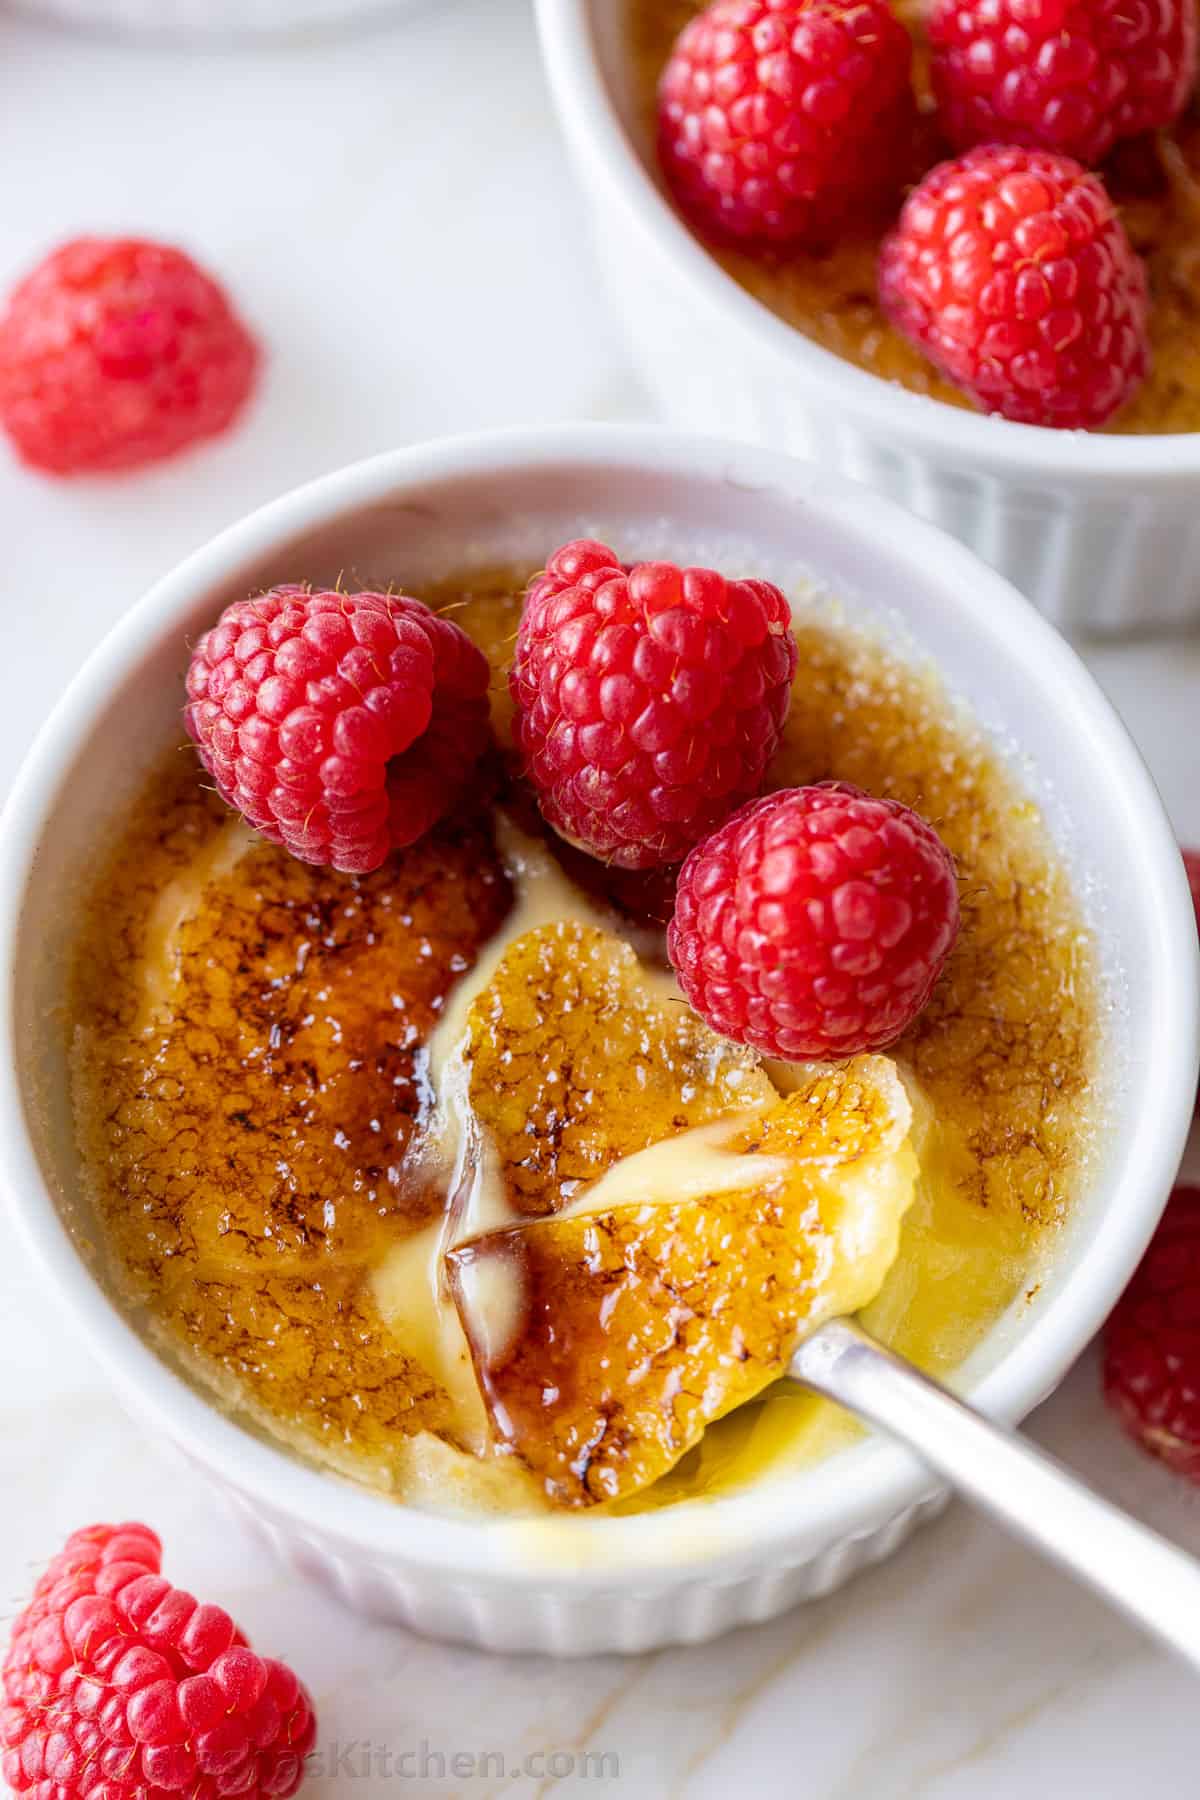 Overhead view of creme brulee topped with raspberries, with the caramelized sugar topping cracked with a spoon.